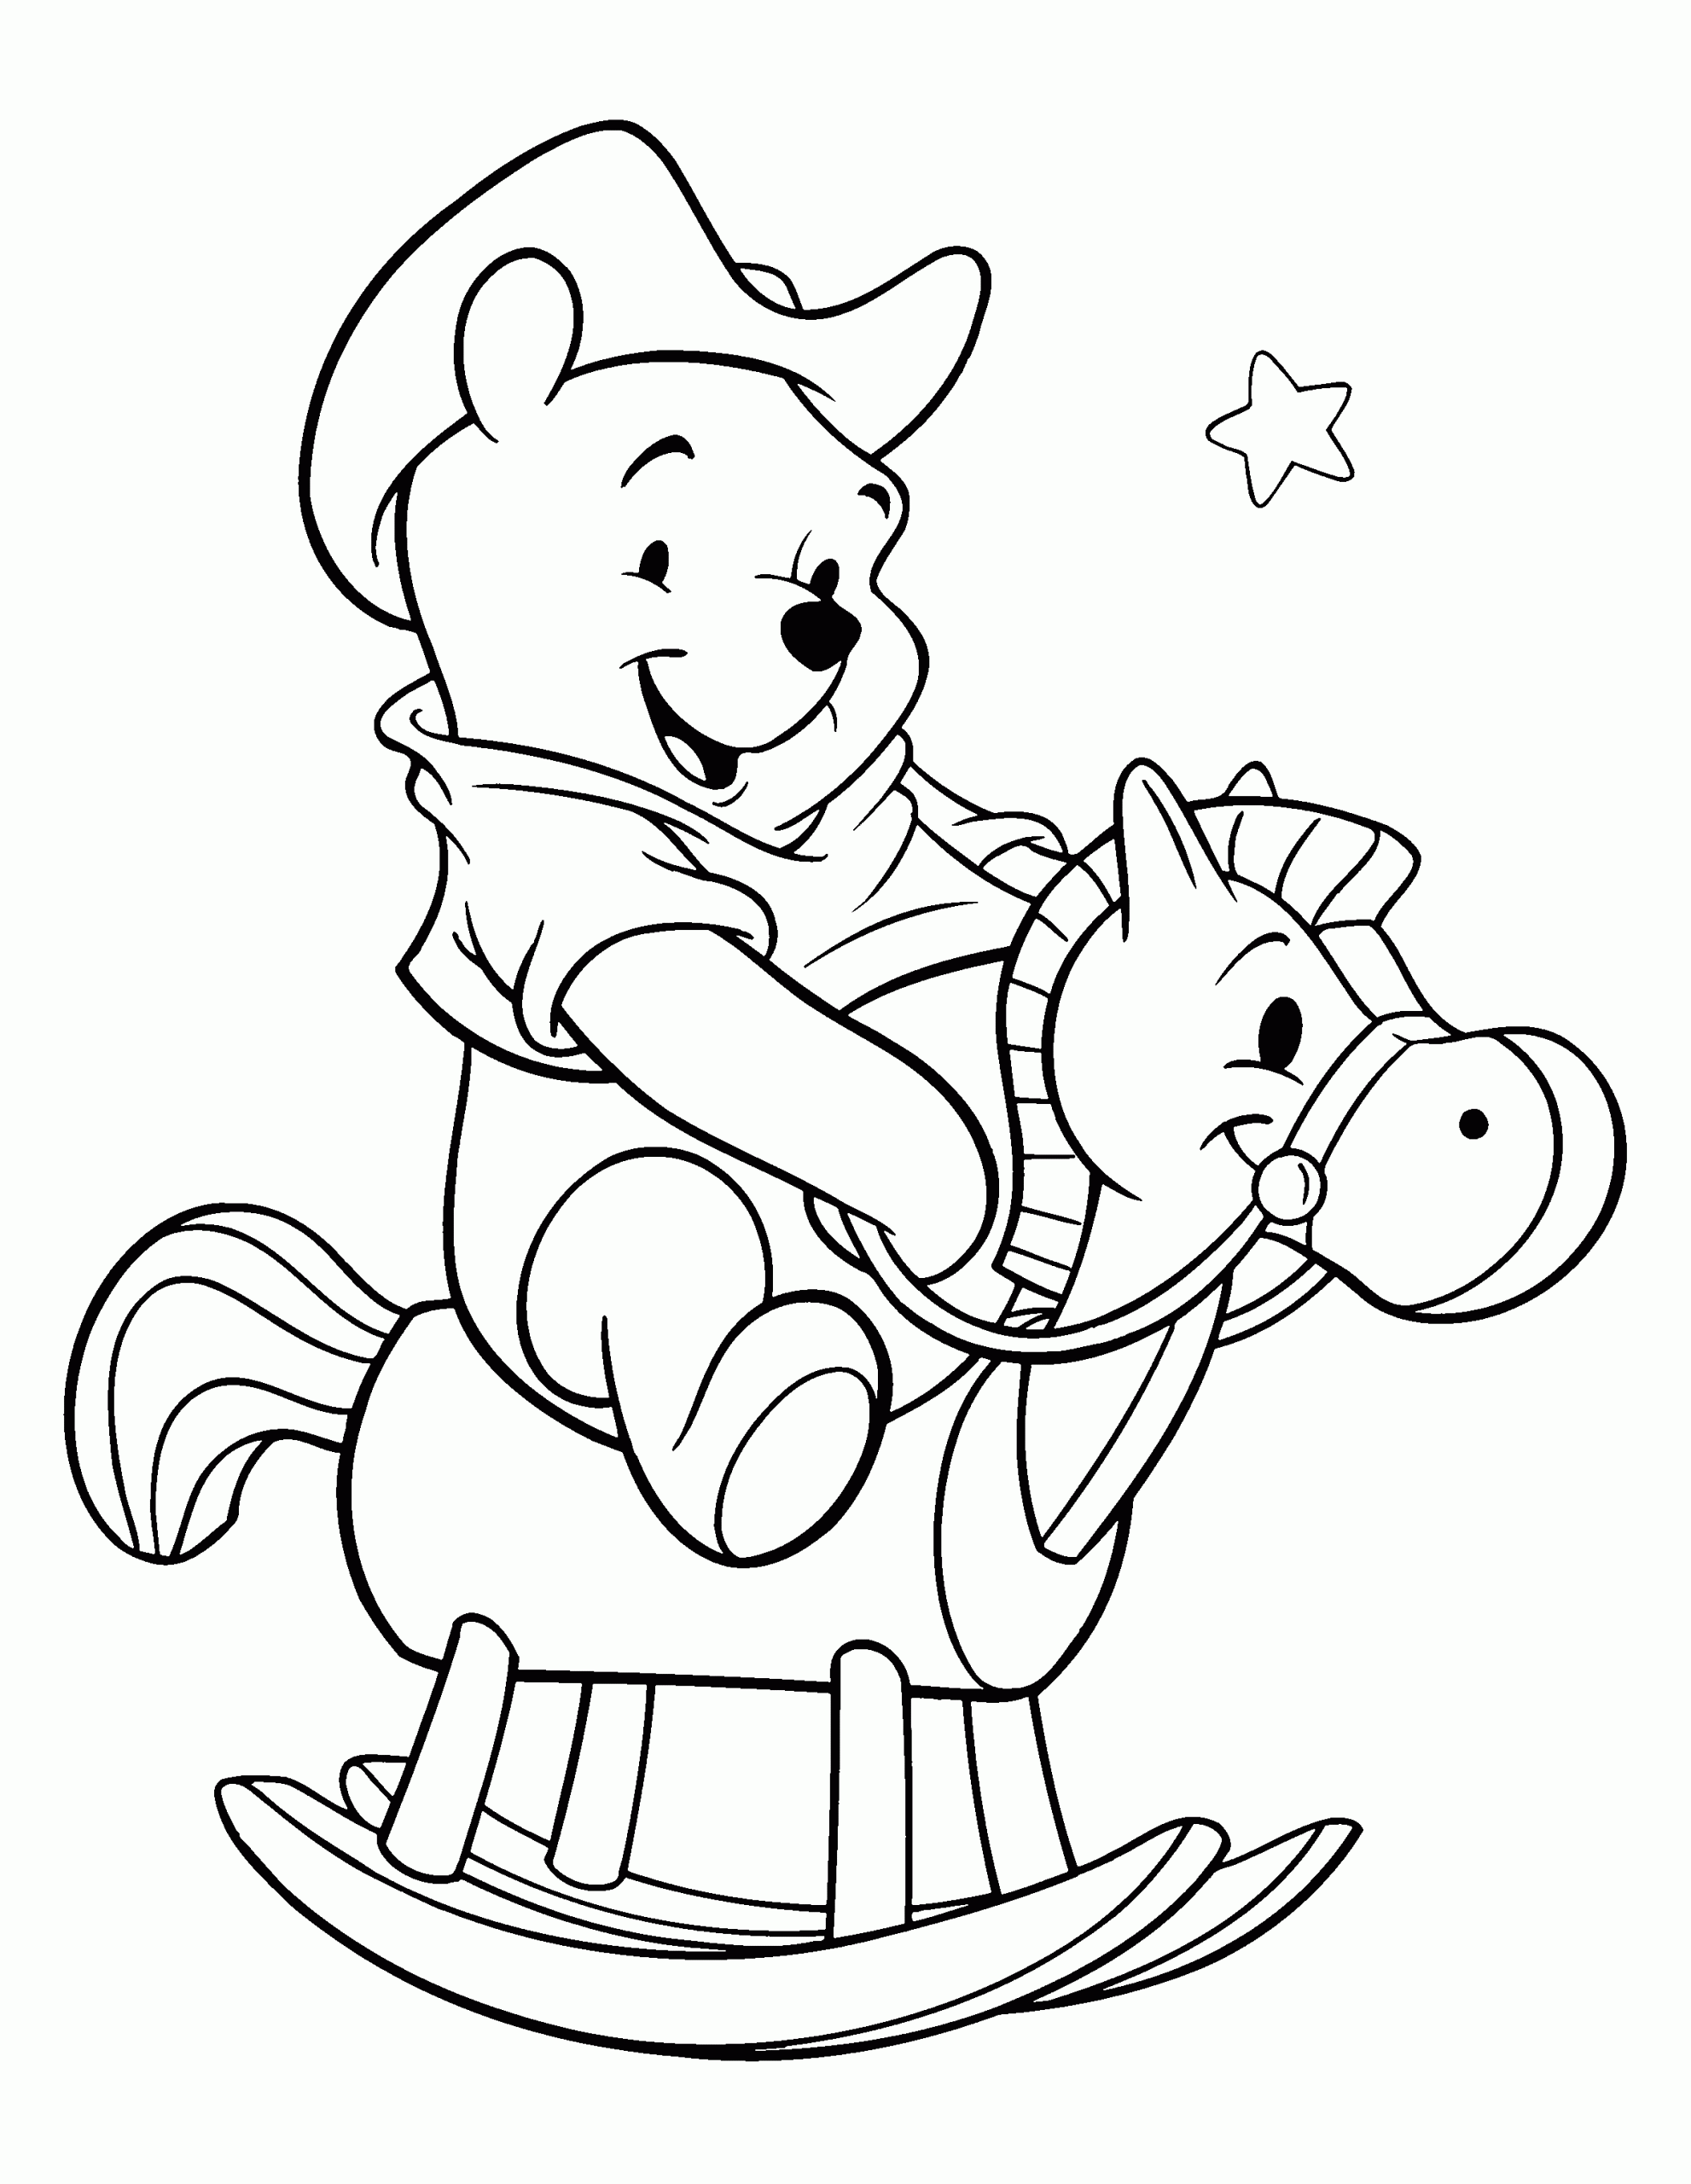 Baby Winnie The Pooh With Wood Horse Coloring Page